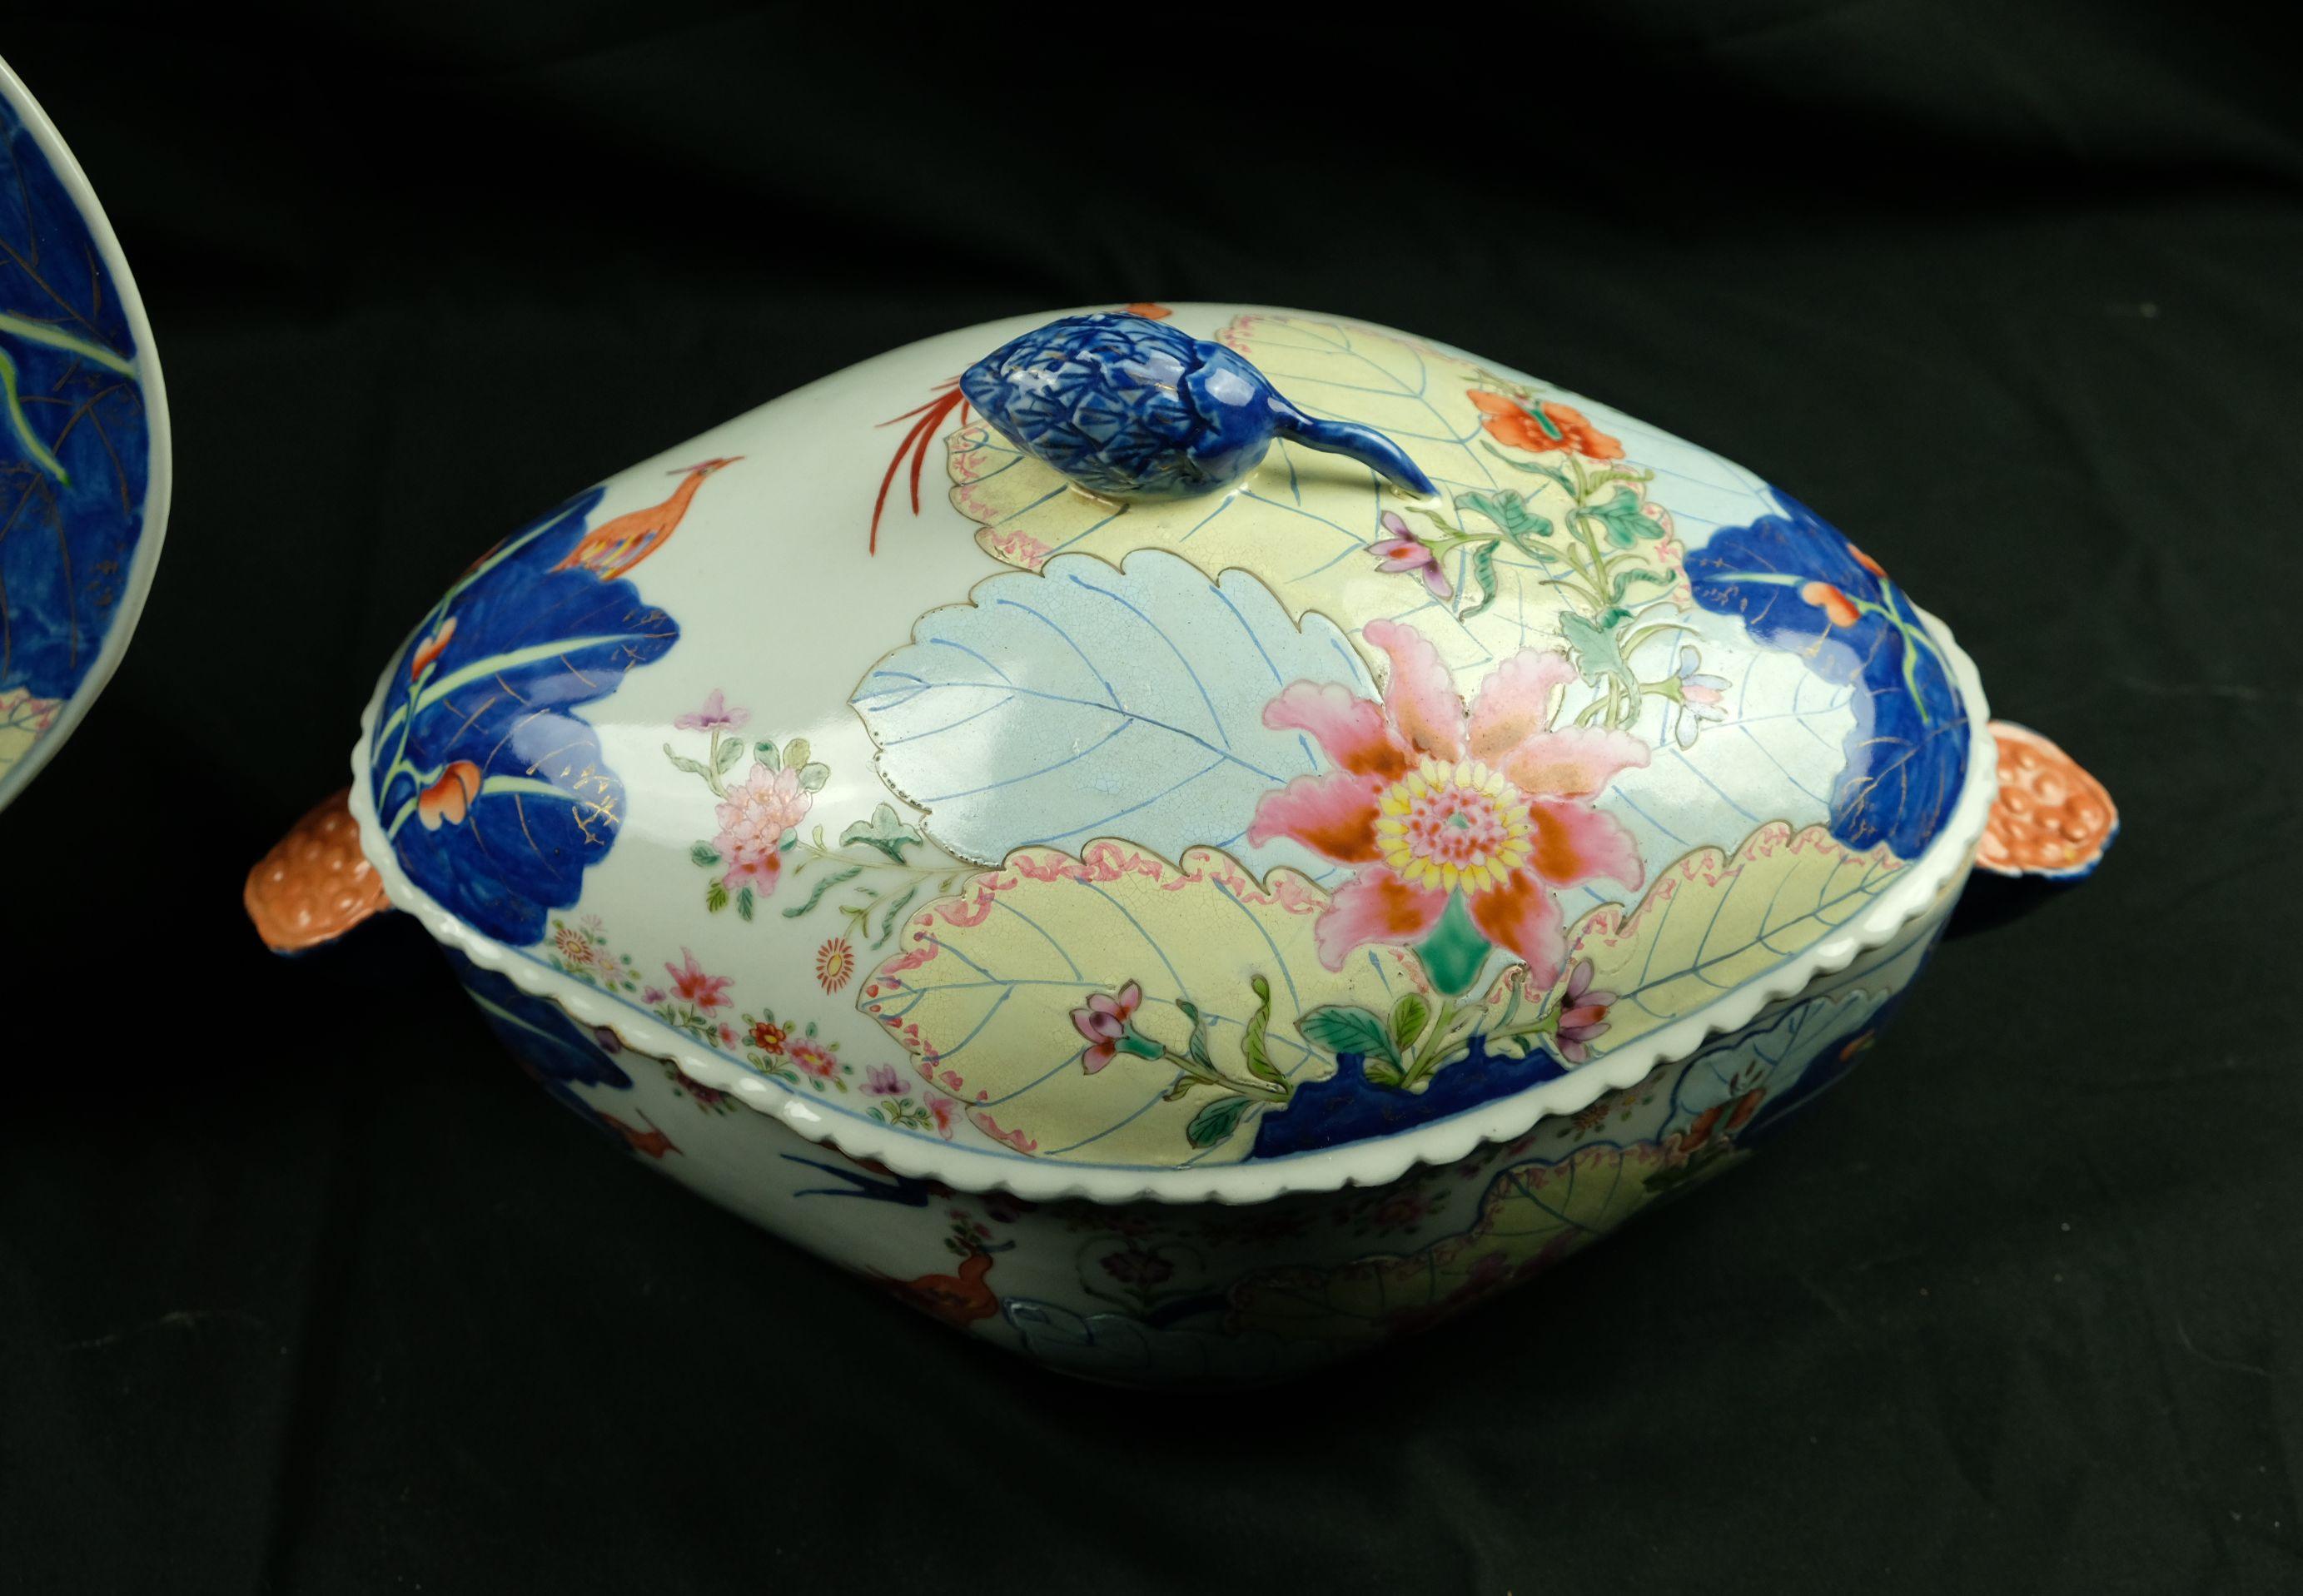 Hand-Painted Large Chinese Antique Famille Rose Tobacco Leaf Porcelain Tureen & Platter